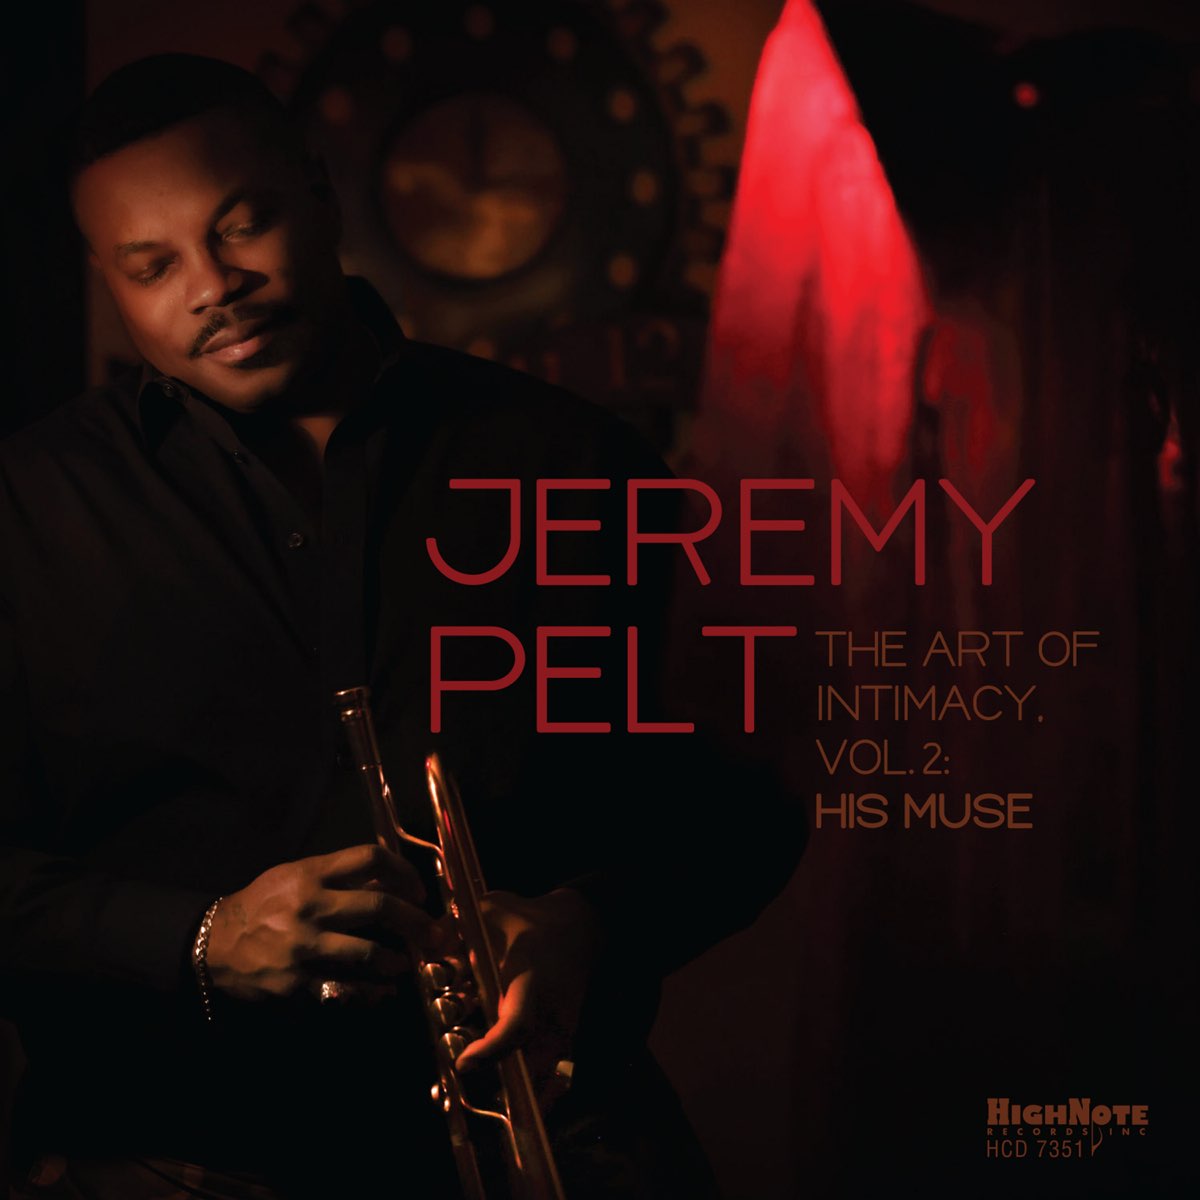 The Art of Intimacy, Vol. 2: His Muse by Jeremy Pelt on Apple Music